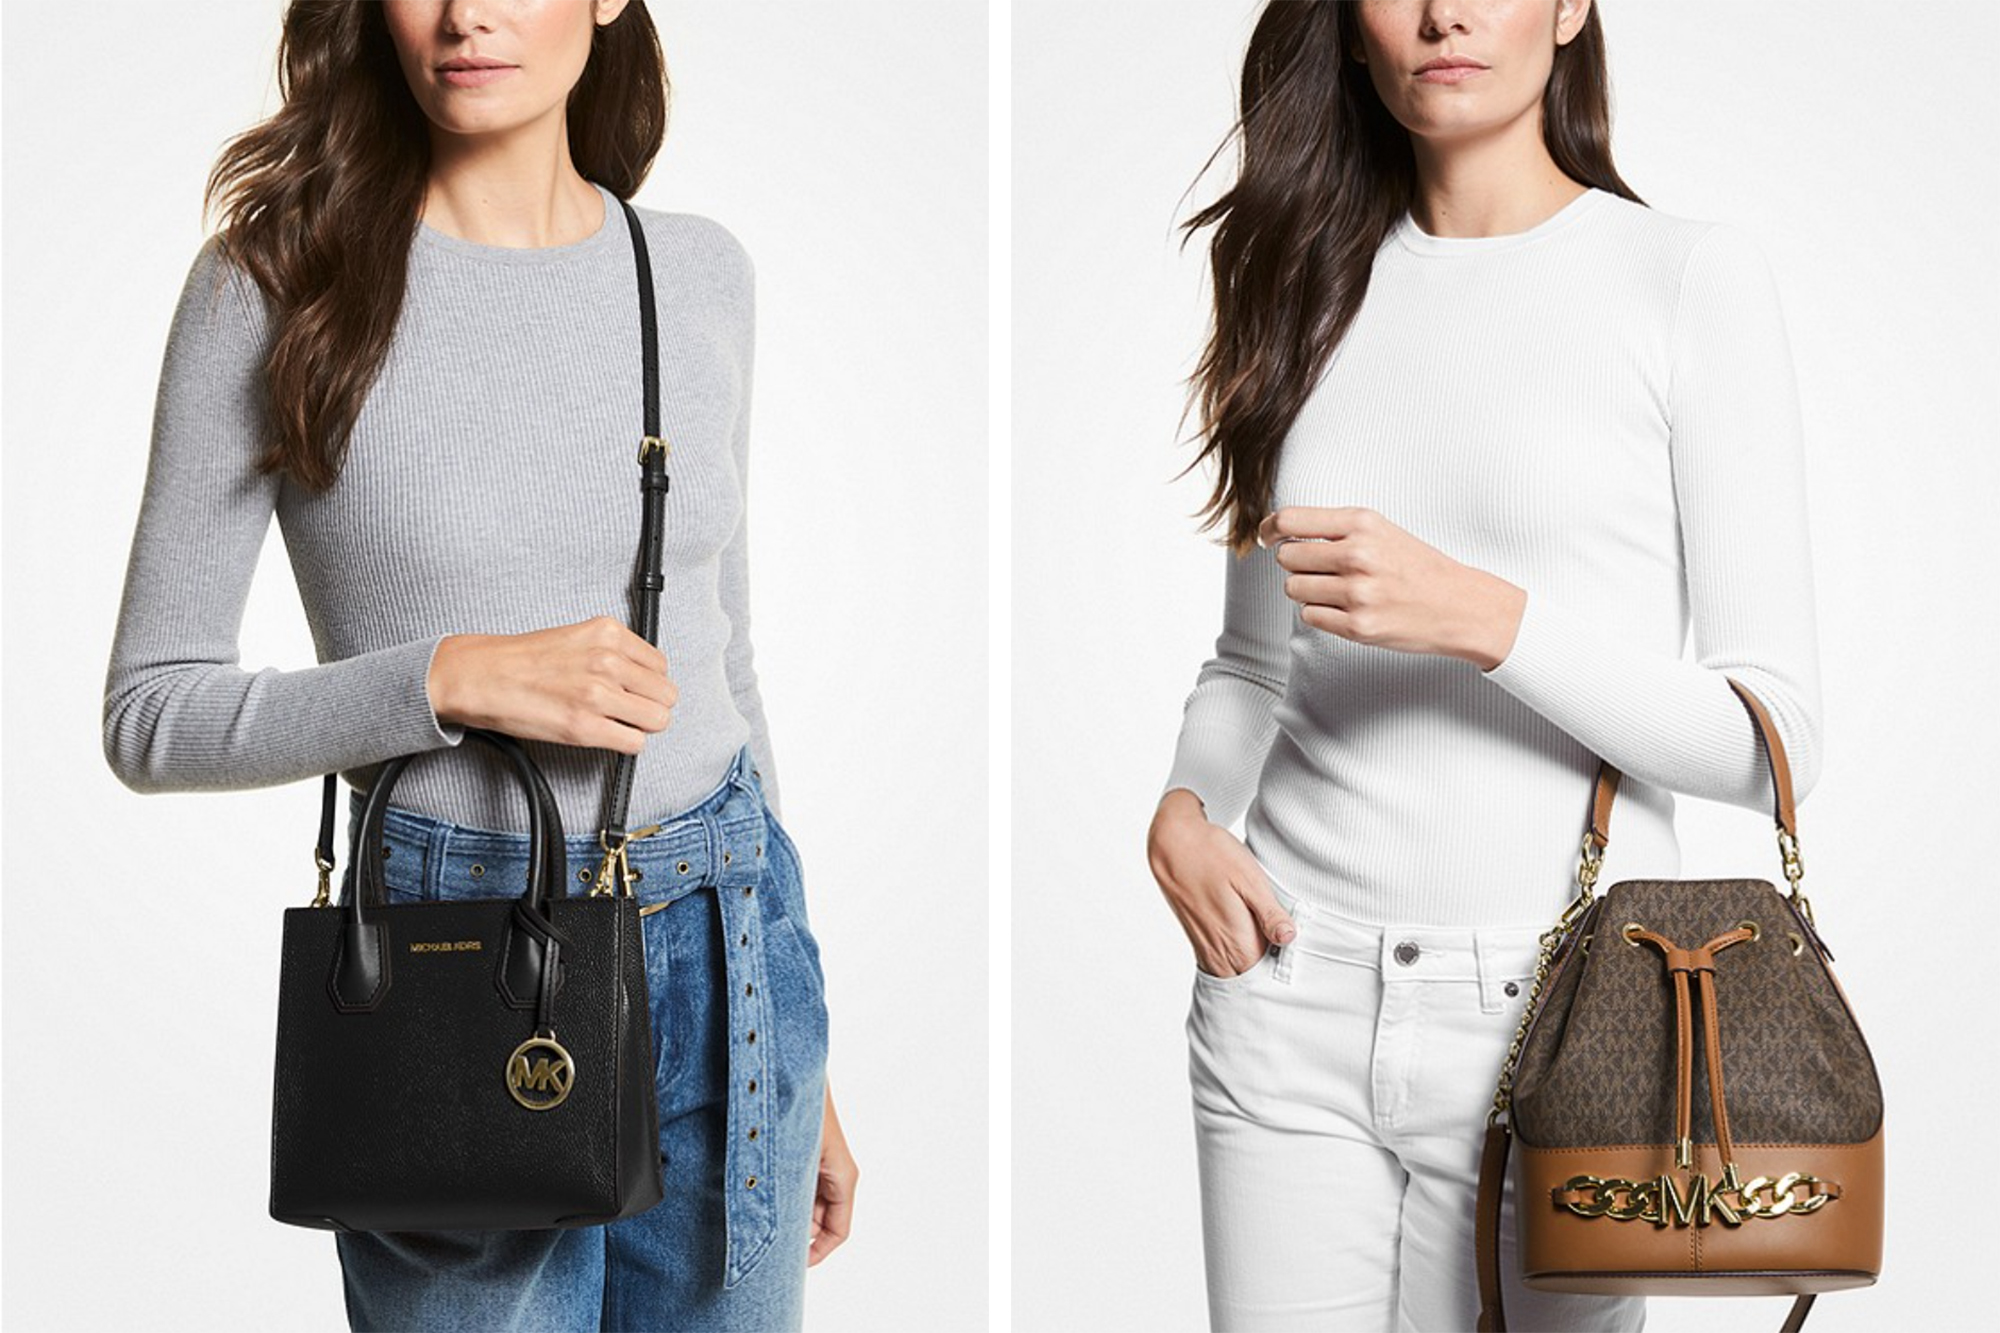 Michael Kors purse: Get purses, accessories and more at huge discounts